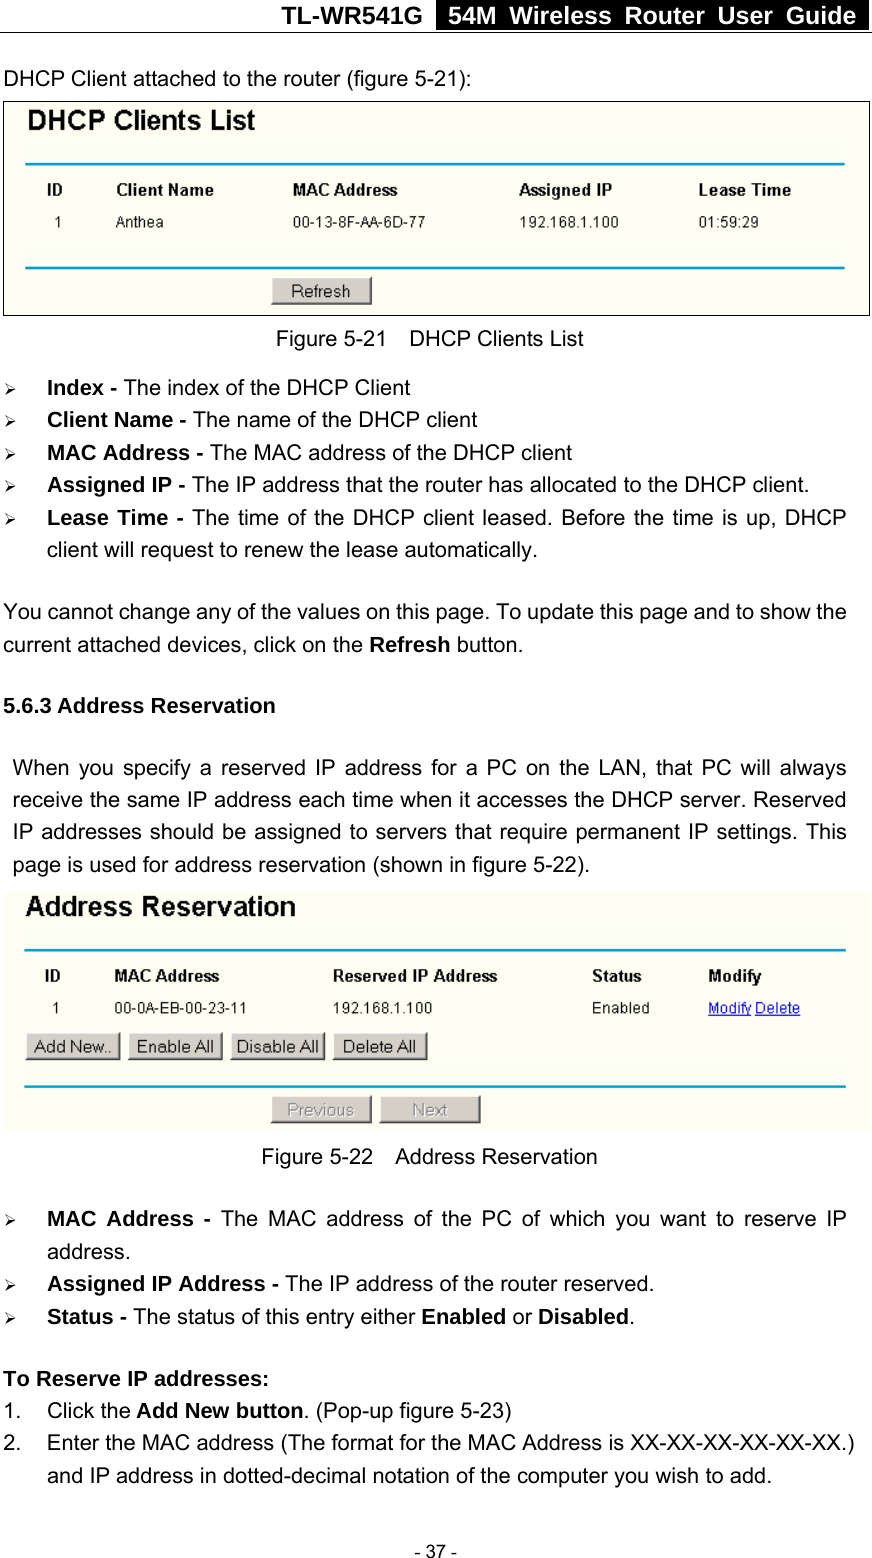 TL-WR541G   54M Wireless Router User Guide  DHCP Client attached to the router (figure 5-21):  Figure 5-21    DHCP Clients List ¾ Index - The index of the DHCP Client   ¾ Client Name - The name of the DHCP client   ¾ MAC Address - The MAC address of the DHCP client   ¾ Assigned IP - The IP address that the router has allocated to the DHCP client. ¾ Lease Time - The time of the DHCP client leased. Before the time is up, DHCP client will request to renew the lease automatically. You cannot change any of the values on this page. To update this page and to show the current attached devices, click on the Refresh button. 5.6.3 Address Reservation When you specify a reserved IP address for a PC on the LAN, that PC will always receive the same IP address each time when it accesses the DHCP server. Reserved IP addresses should be assigned to servers that require permanent IP settings. This page is used for address reservation (shown in figure 5-22).  Figure 5-22  Address Reservation ¾ MAC Address - The MAC address of the PC of which you want to reserve IP address. ¾ Assigned IP Address - The IP address of the router reserved. ¾ Status - The status of this entry either Enabled or Disabled. To Reserve IP addresses:  1. Click the Add New button. (Pop-up figure 5-23) 2.  Enter the MAC address (The format for the MAC Address is XX-XX-XX-XX-XX-XX.) and IP address in dotted-decimal notation of the computer you wish to add.    - 37 - 